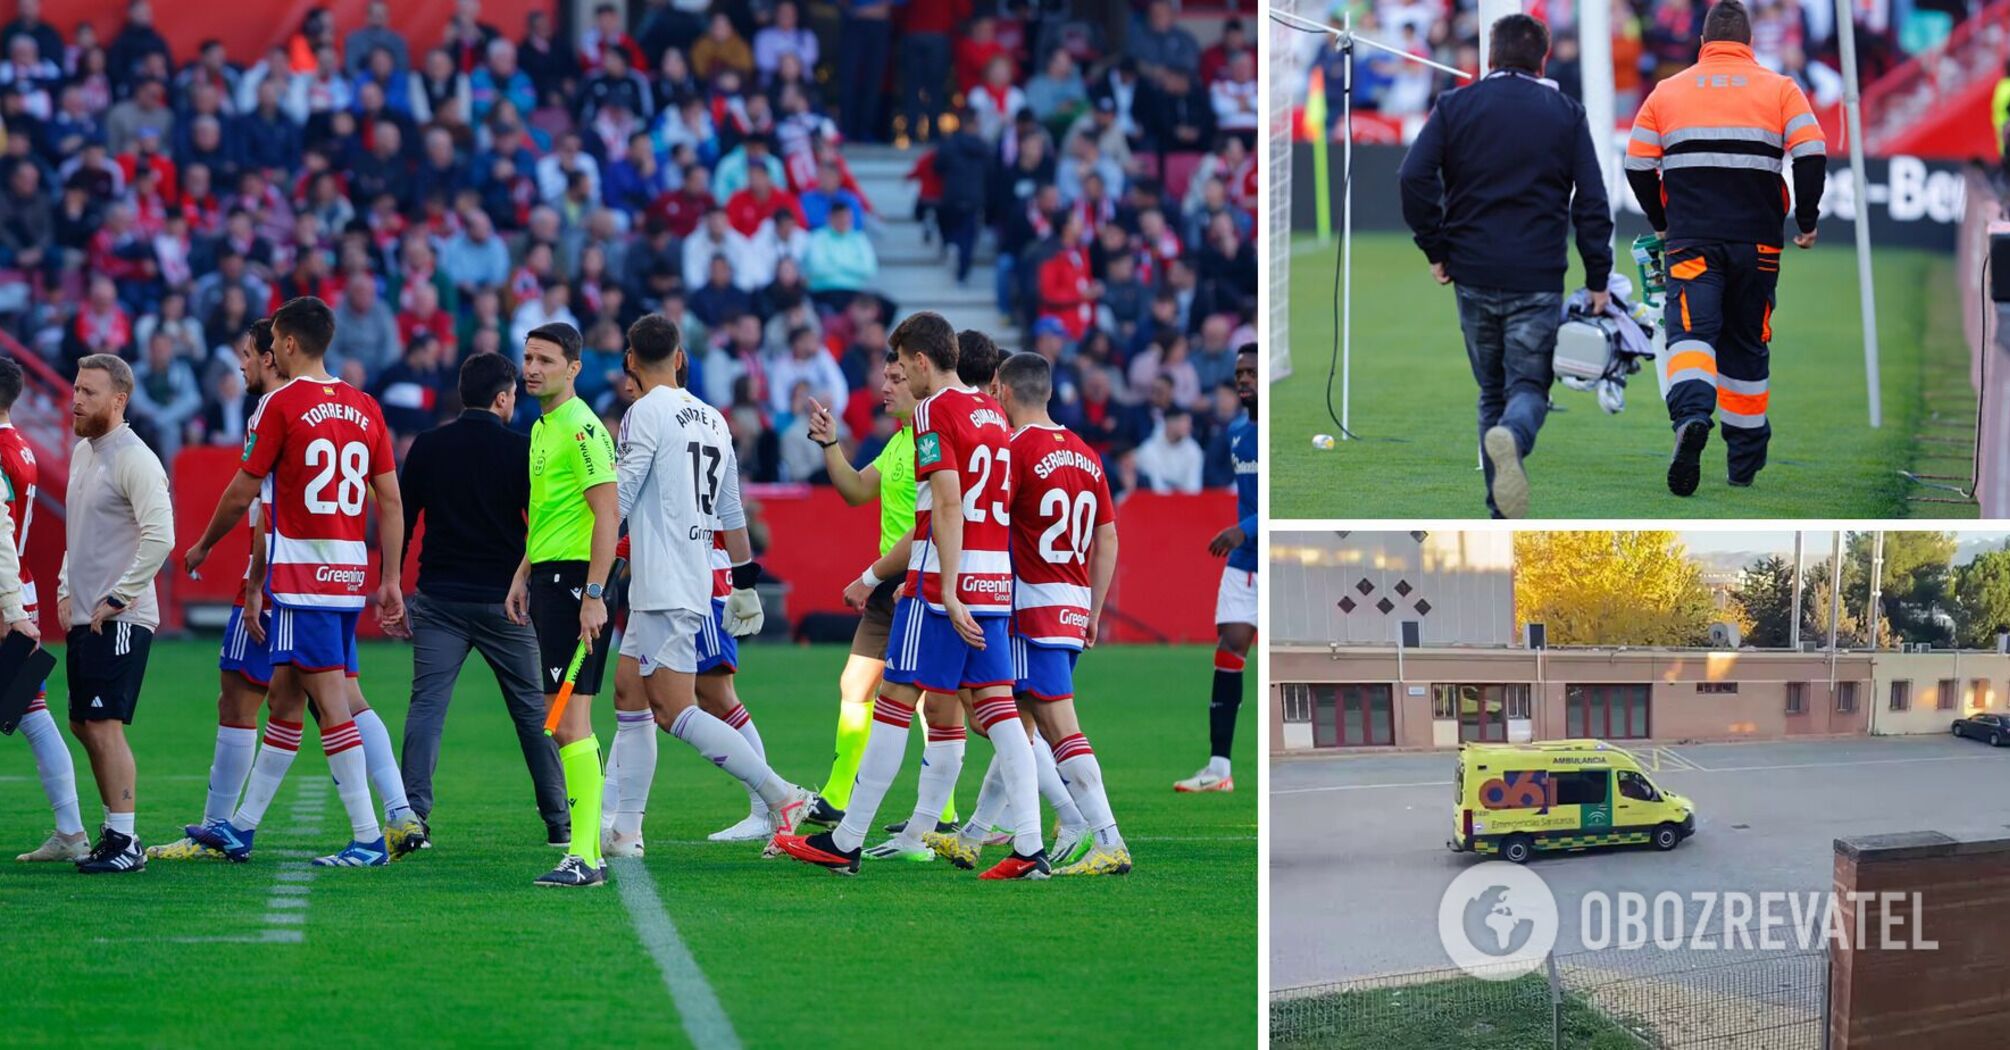 Spanish championship match canceled due to deadly tragedy in the stands